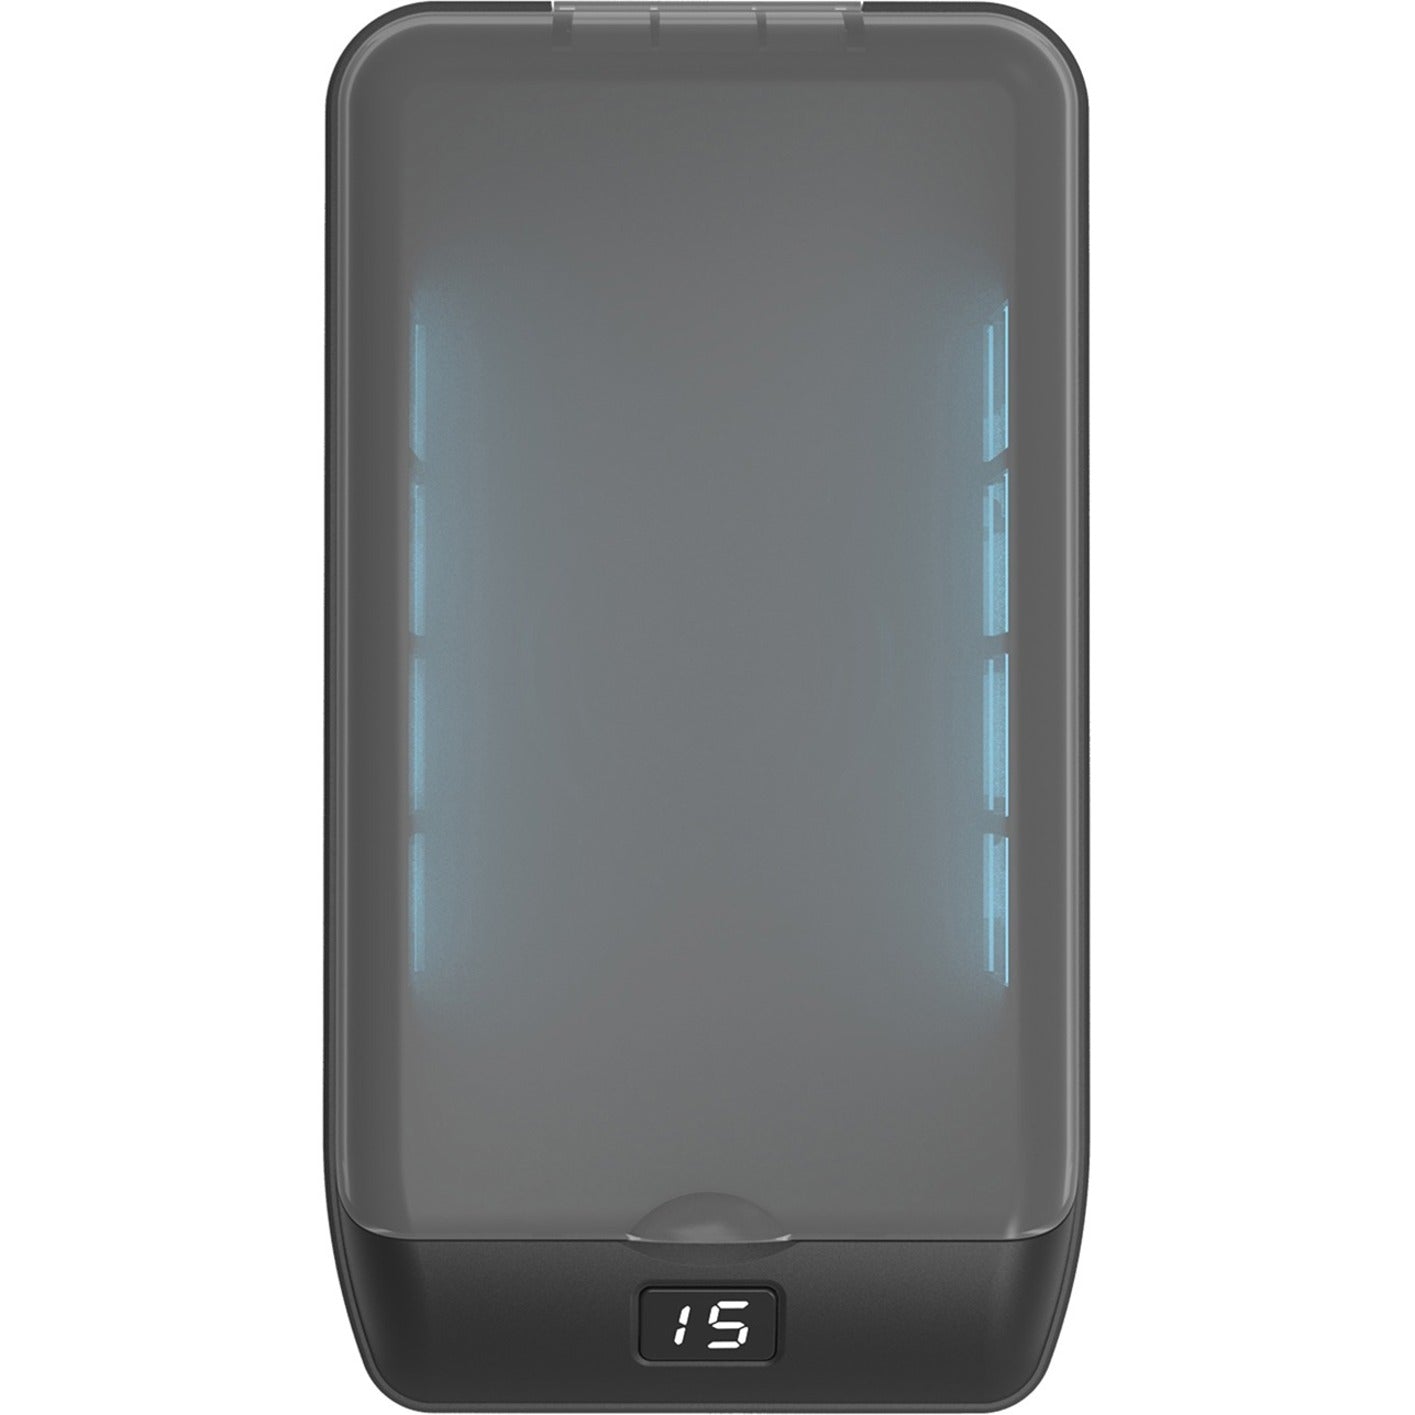 V7 VMPSTLZ Mobile Phone Sanitizer, Kills 99.9% of Germs, Portable and Easy to Use